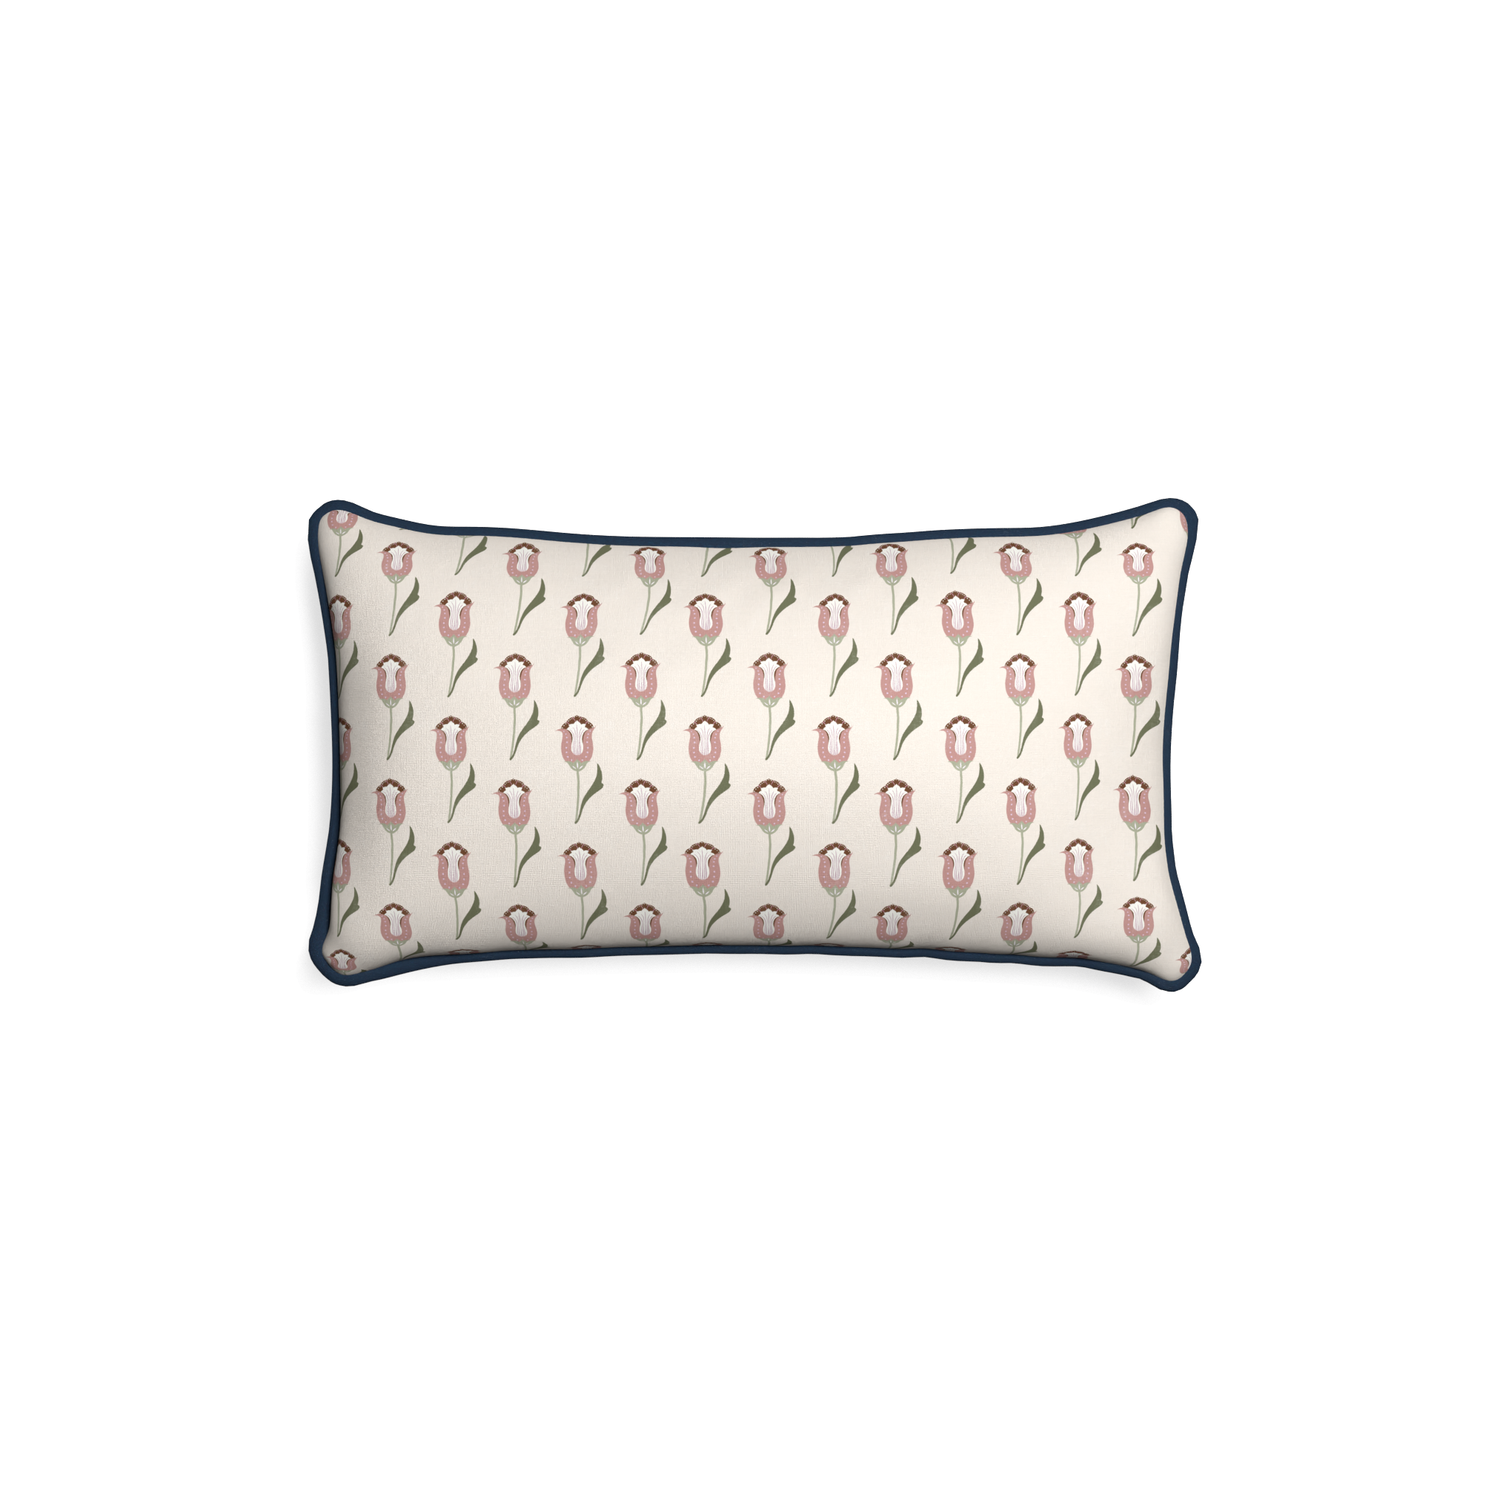 Petite-lumbar annabelle orchid custom pink tulippillow with c piping on white background